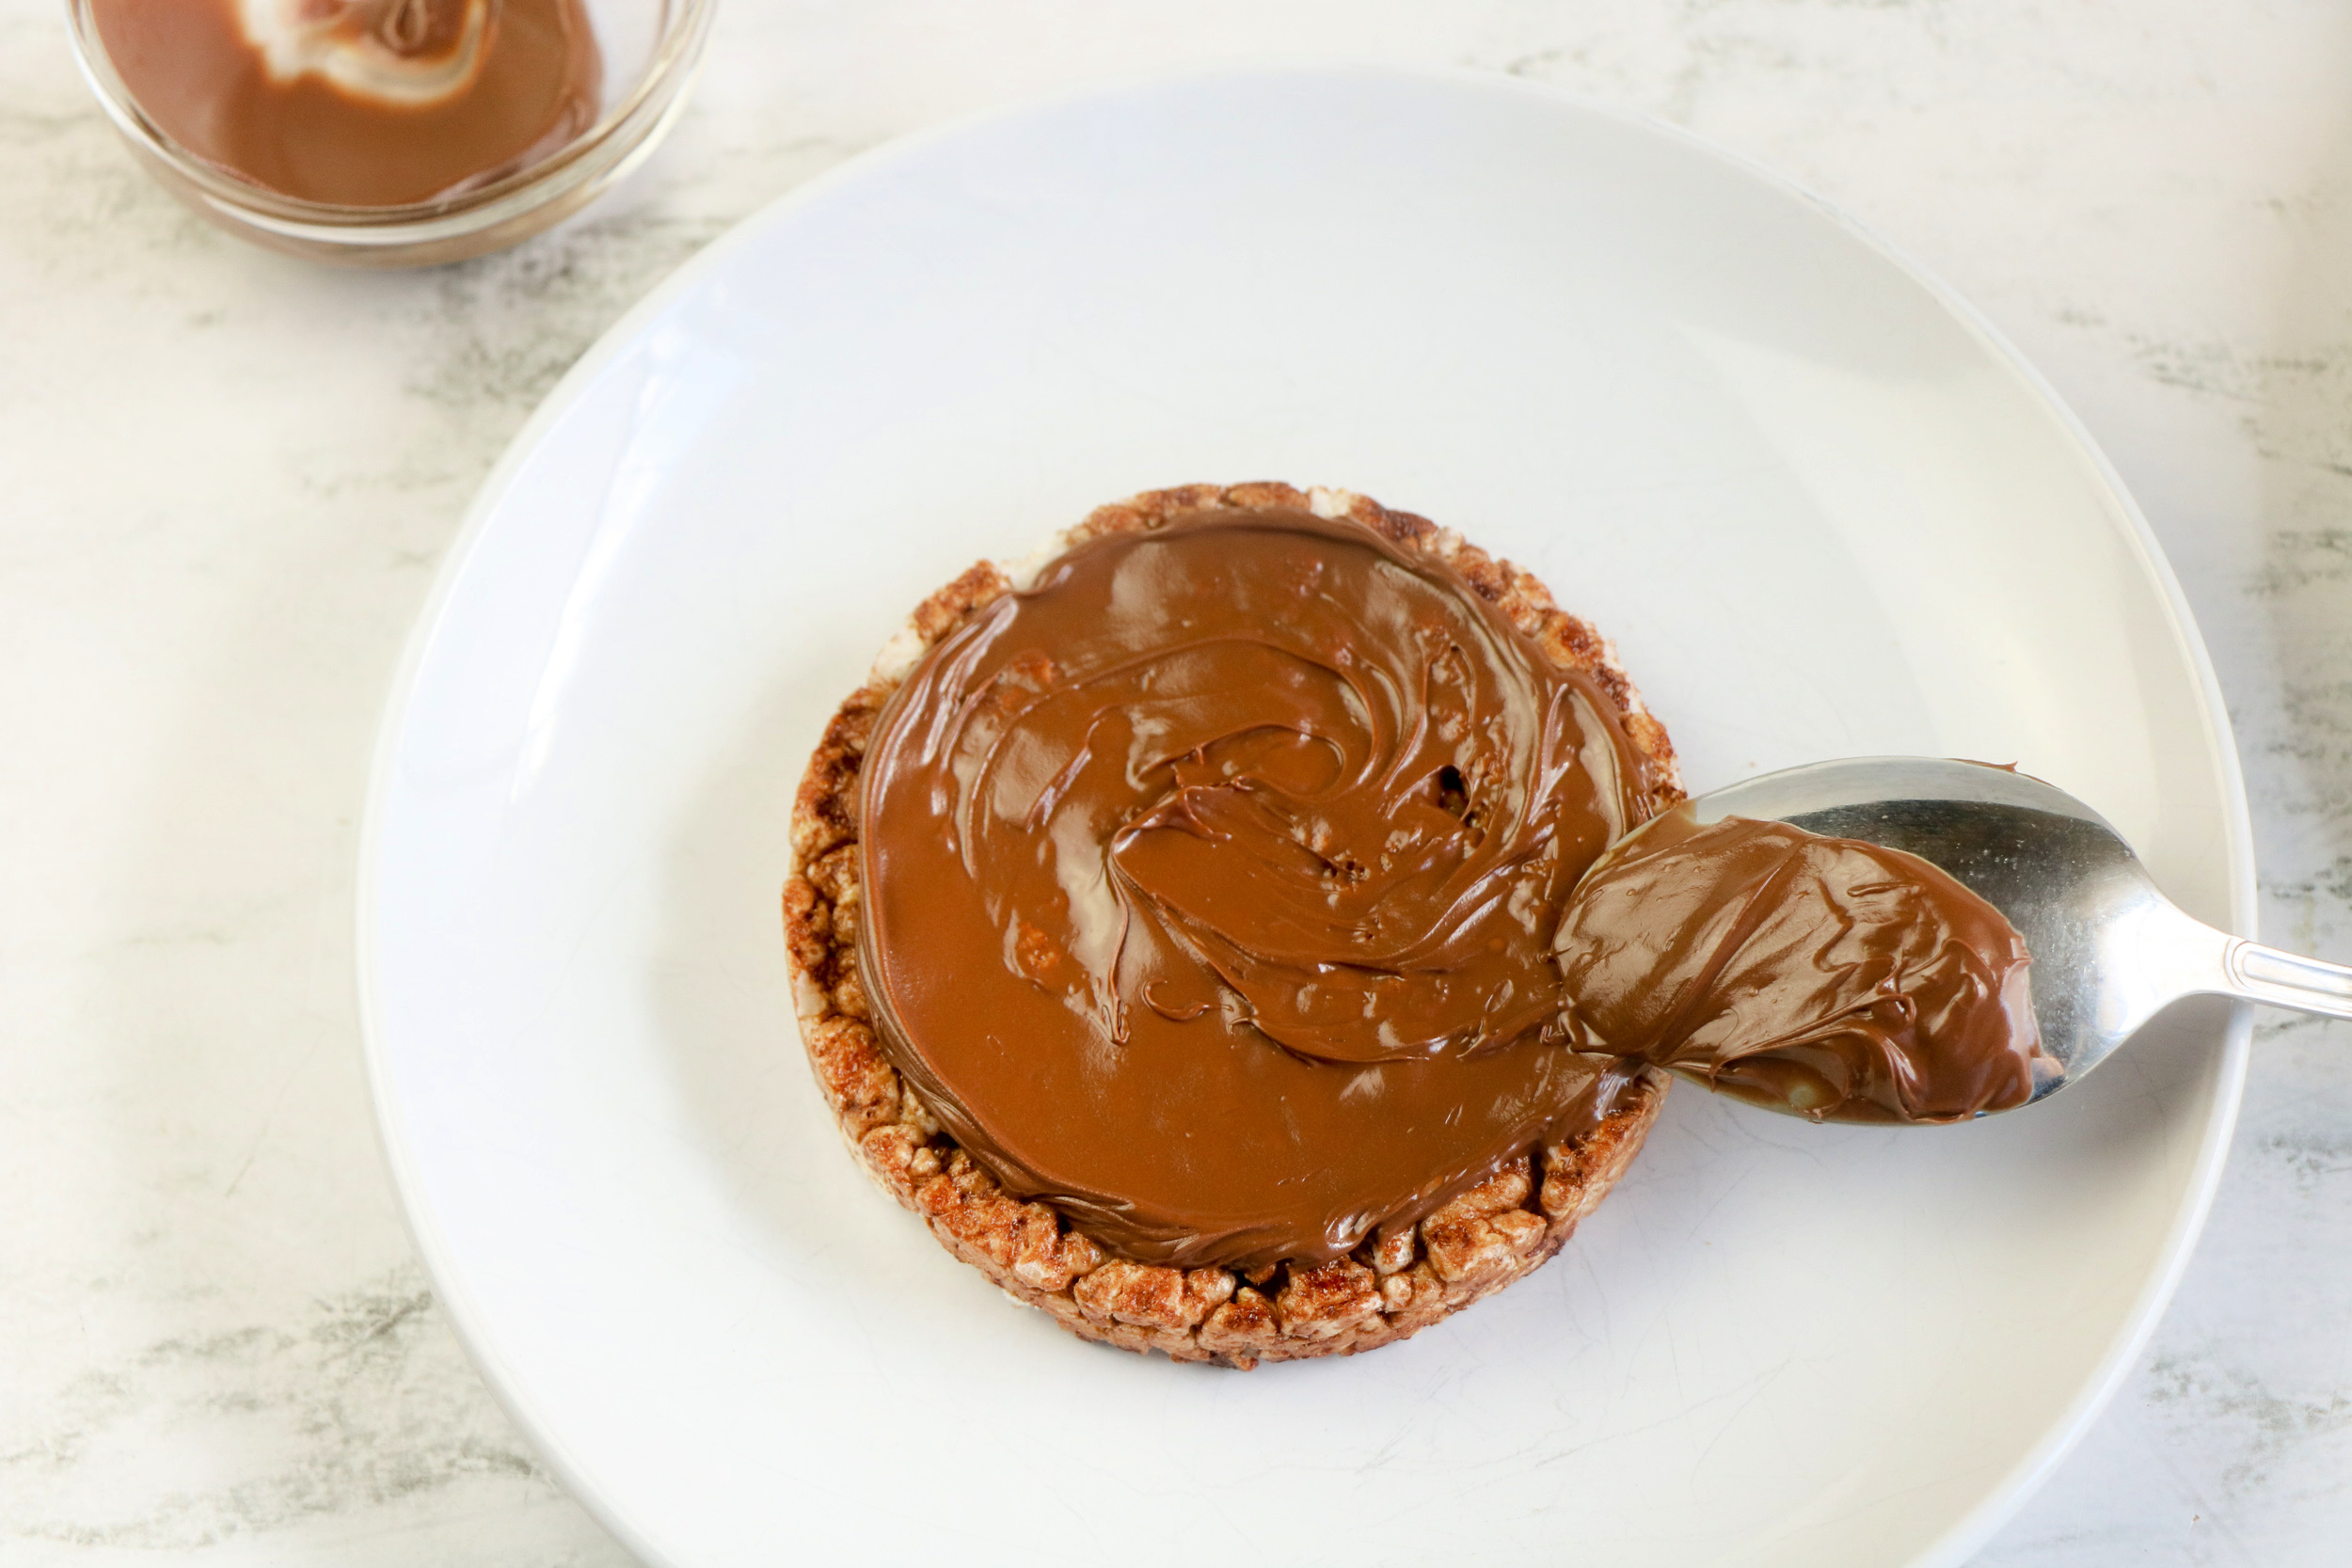 First, spread the hazelnut spread on the rice cake with a spoon.